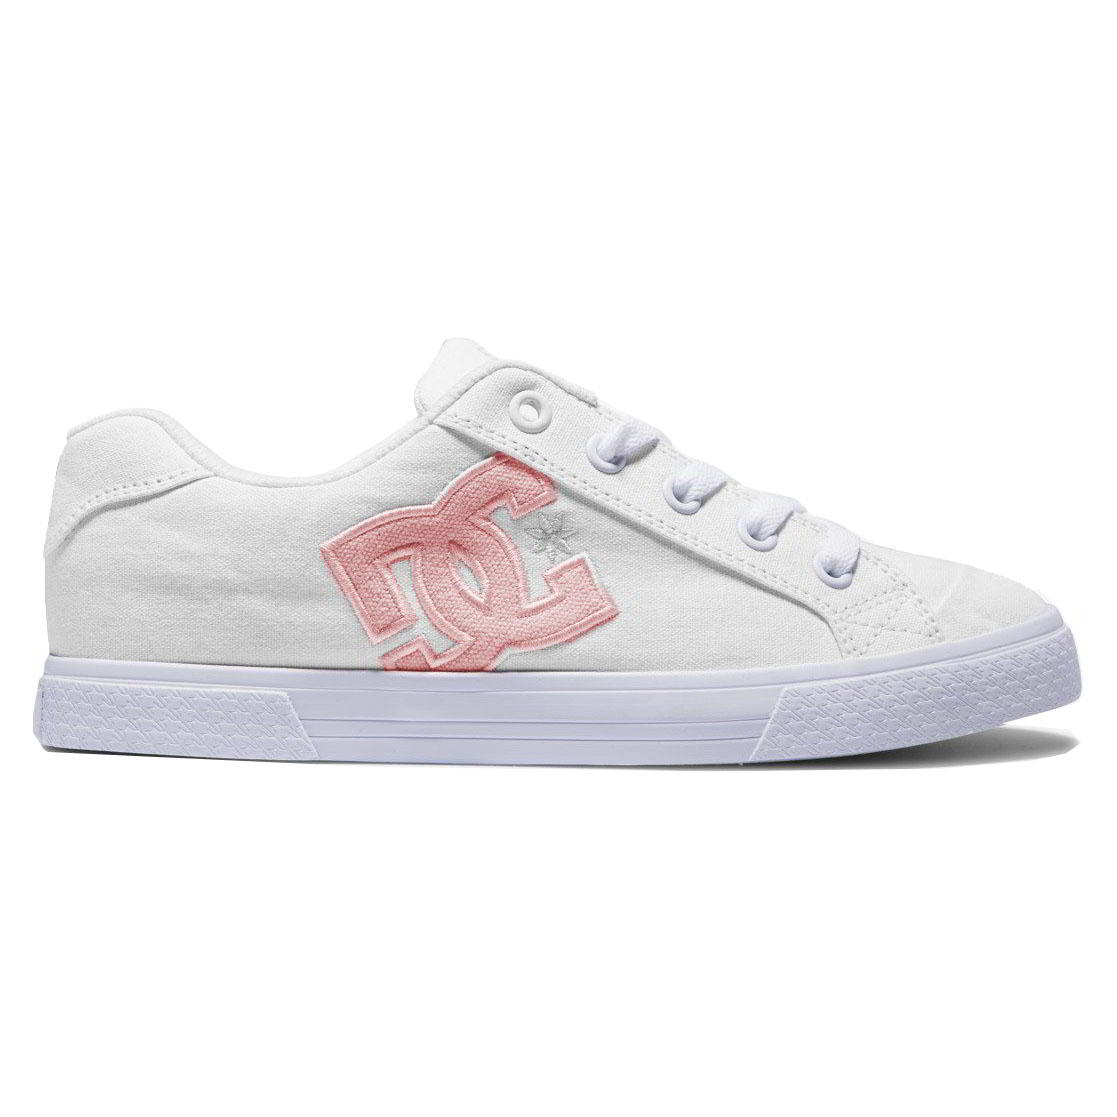 DC Womens Chelsea Skate Shoes Trainers White Pink - UK 6.5 2951